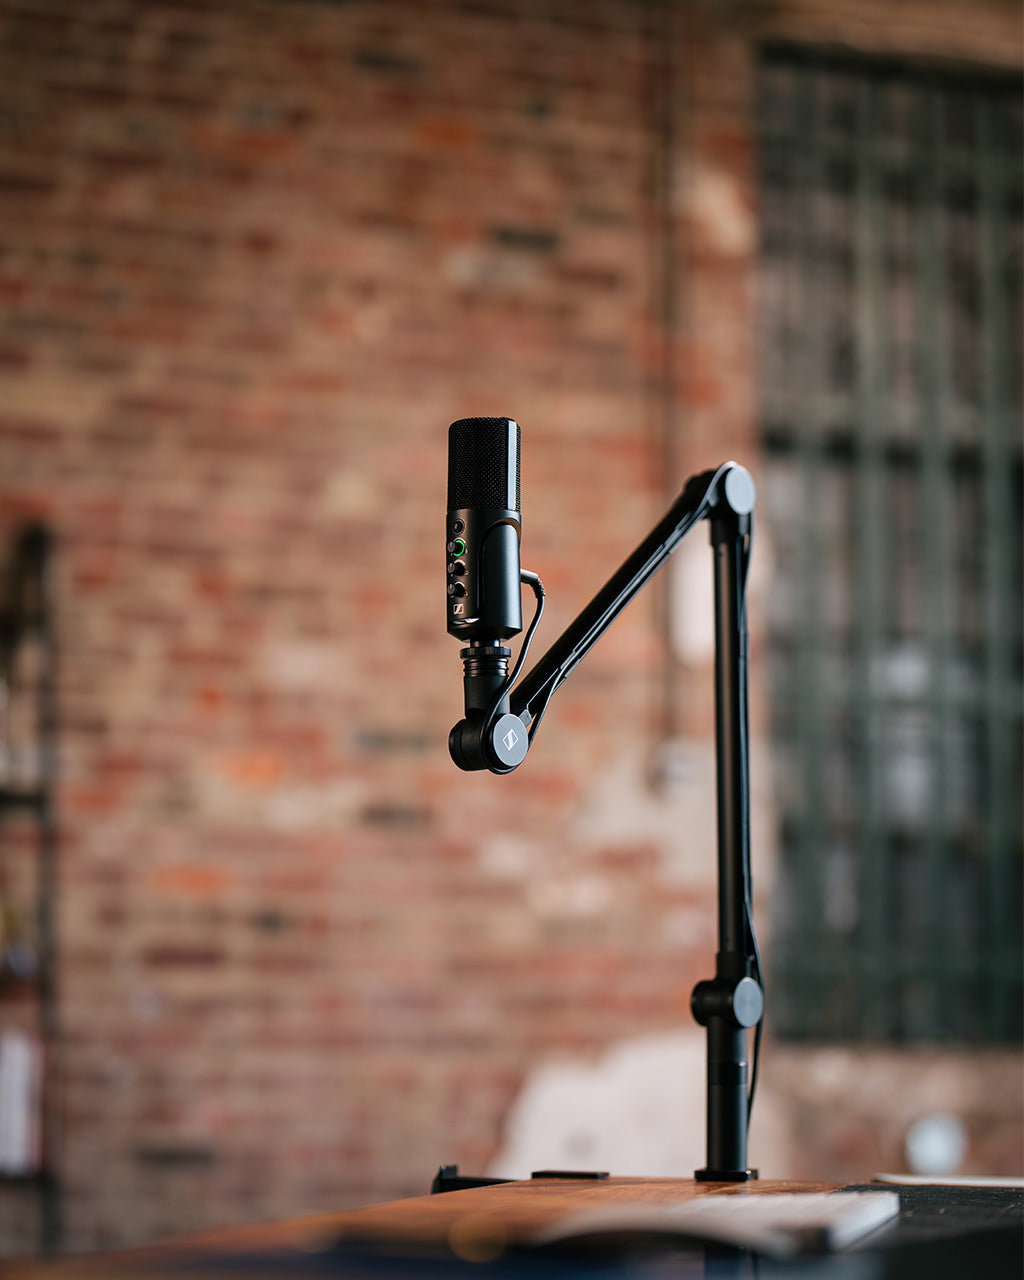 Pro Sound for Everyone: The Sennheiser Profile USB Microphone 